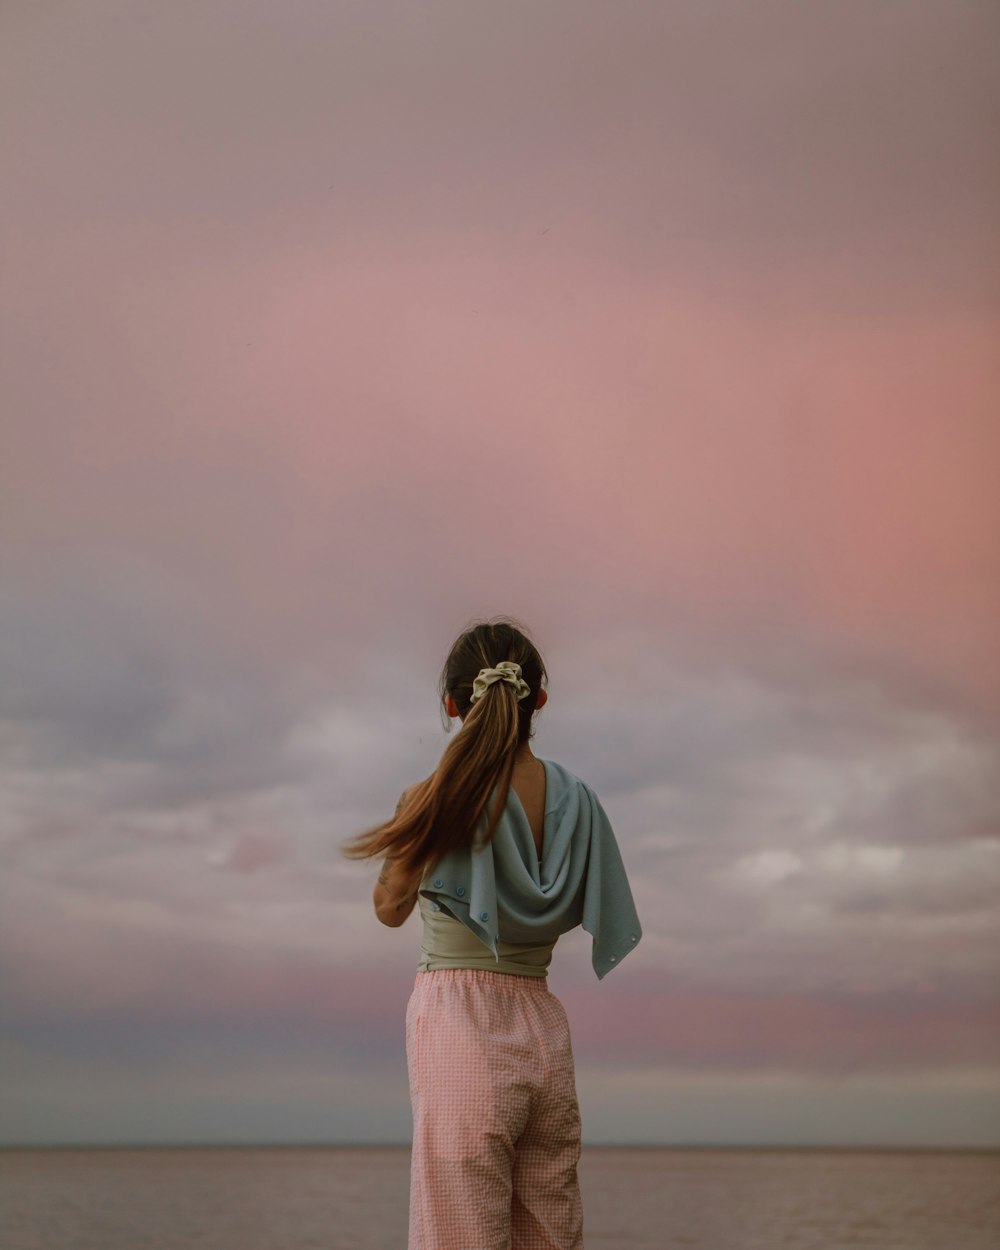 woman in white shirt and gray skirt standing under gray sky